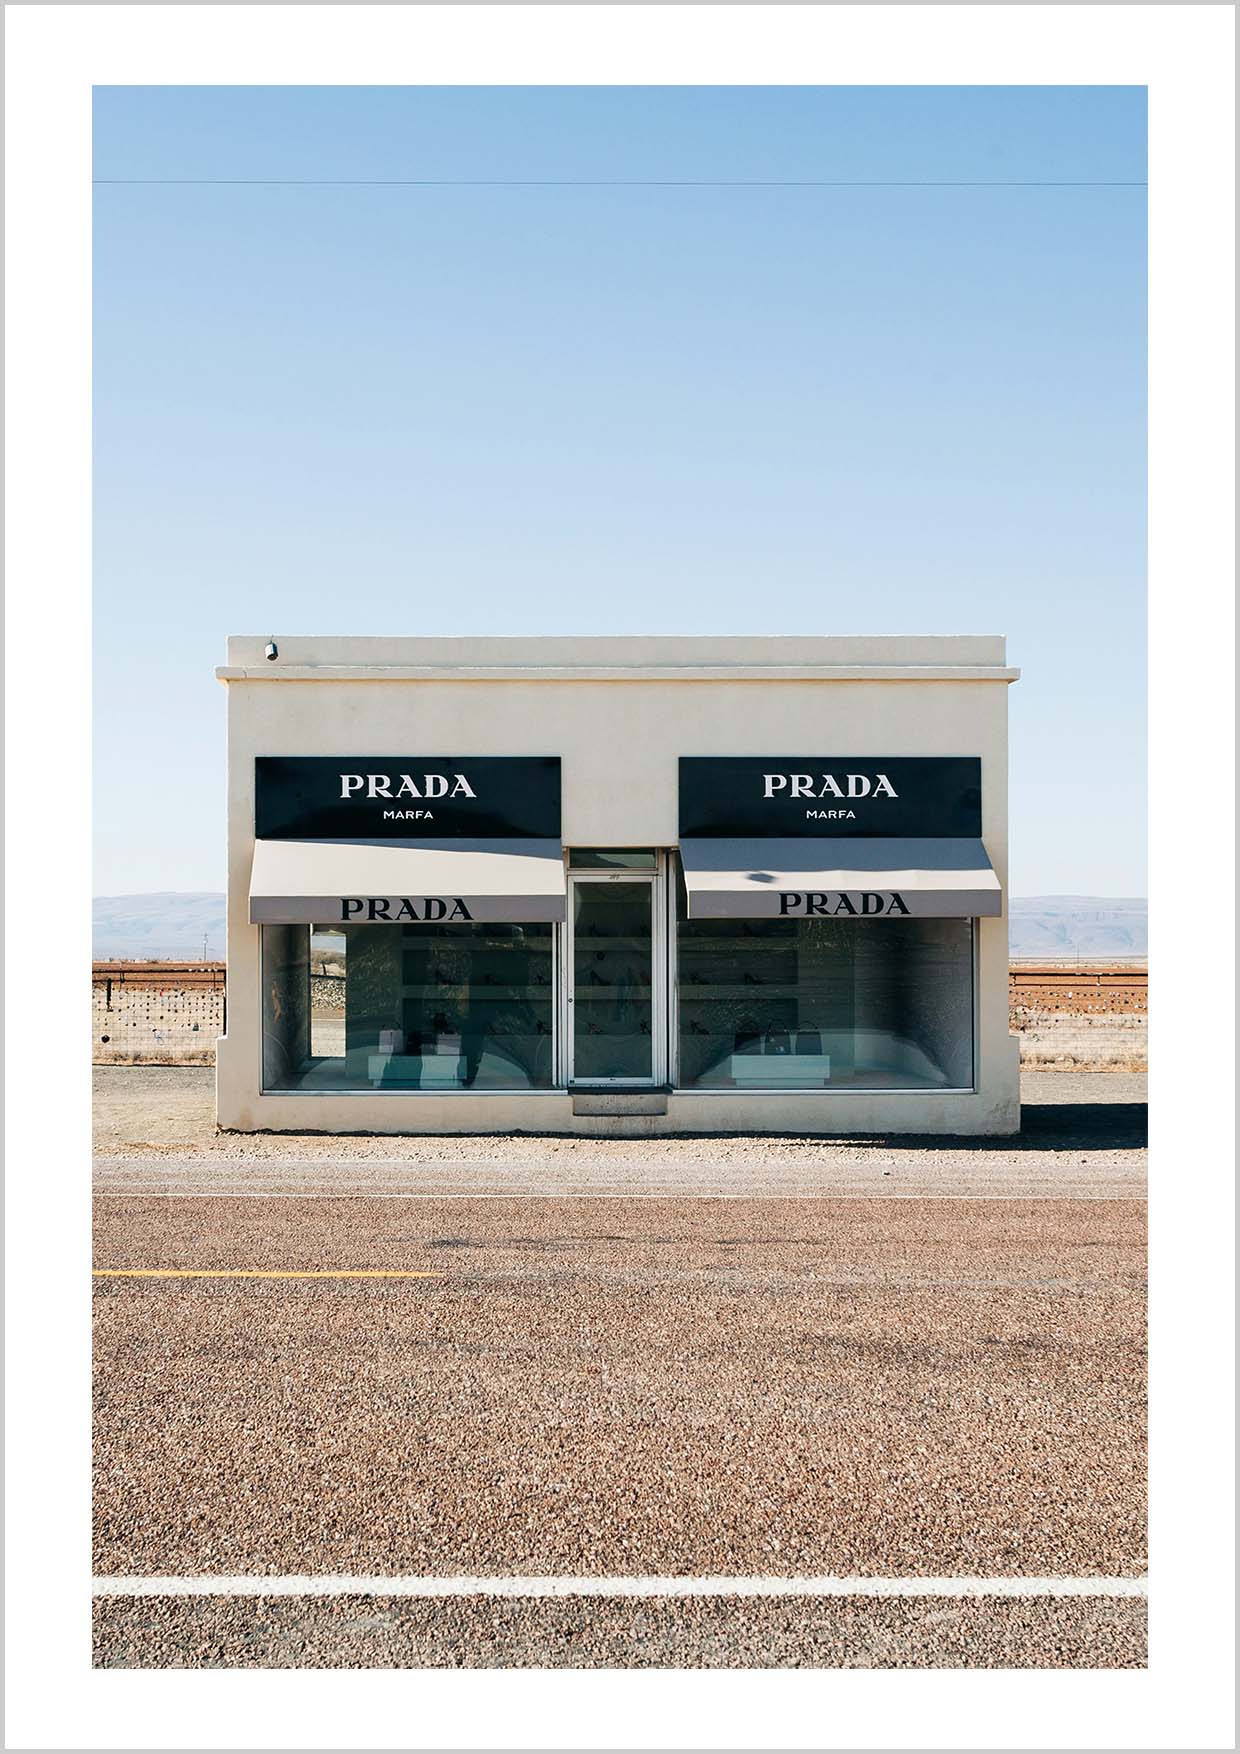 Photograph of the well-kown Prada Marfa fake shop located in a desert in Texas, USA